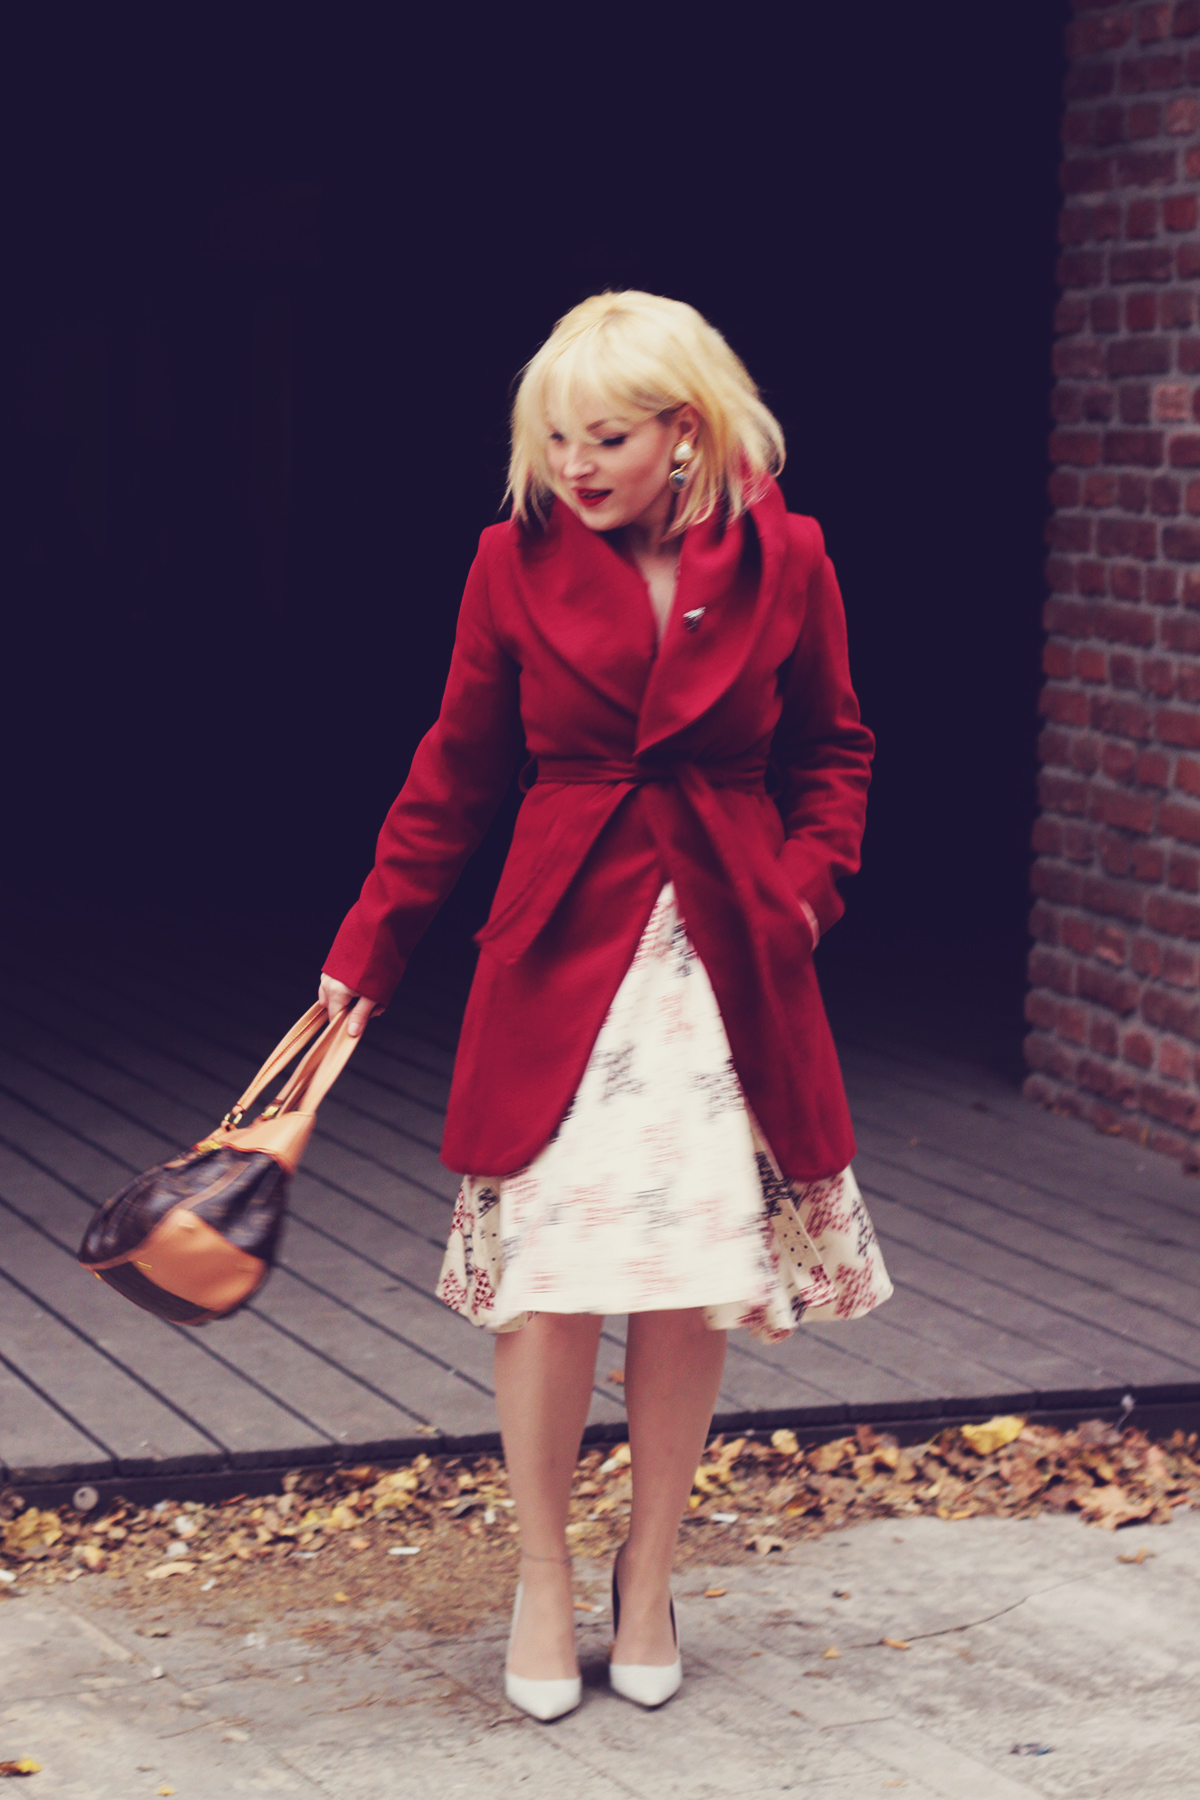 winter fashion, christmas party look, louis vuitton bag, red coat, pattern dress, white heels, vintage earrings and brooch